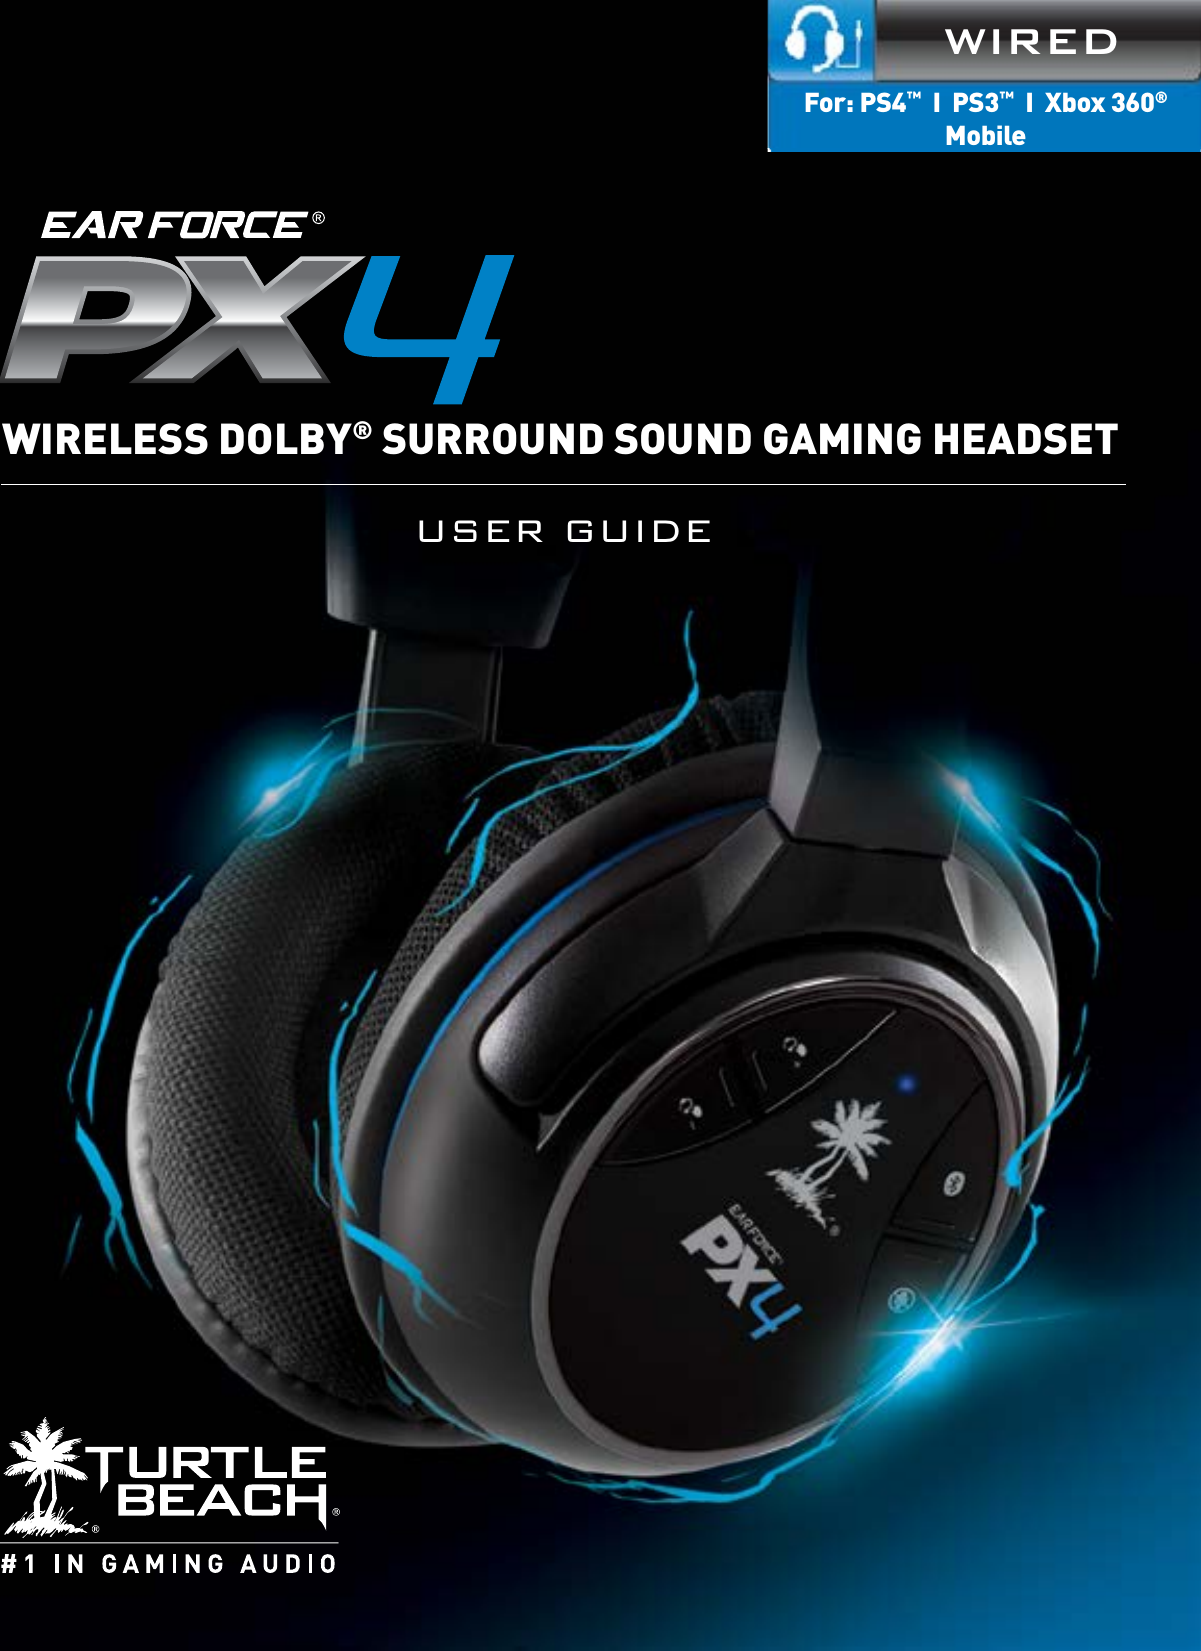 User GUideWIREDFor: PS4™  I  PS3™  I  Xbox 360®MobileWIRELESS DOLBY® SURROUND SOUND GAMING HEADSET